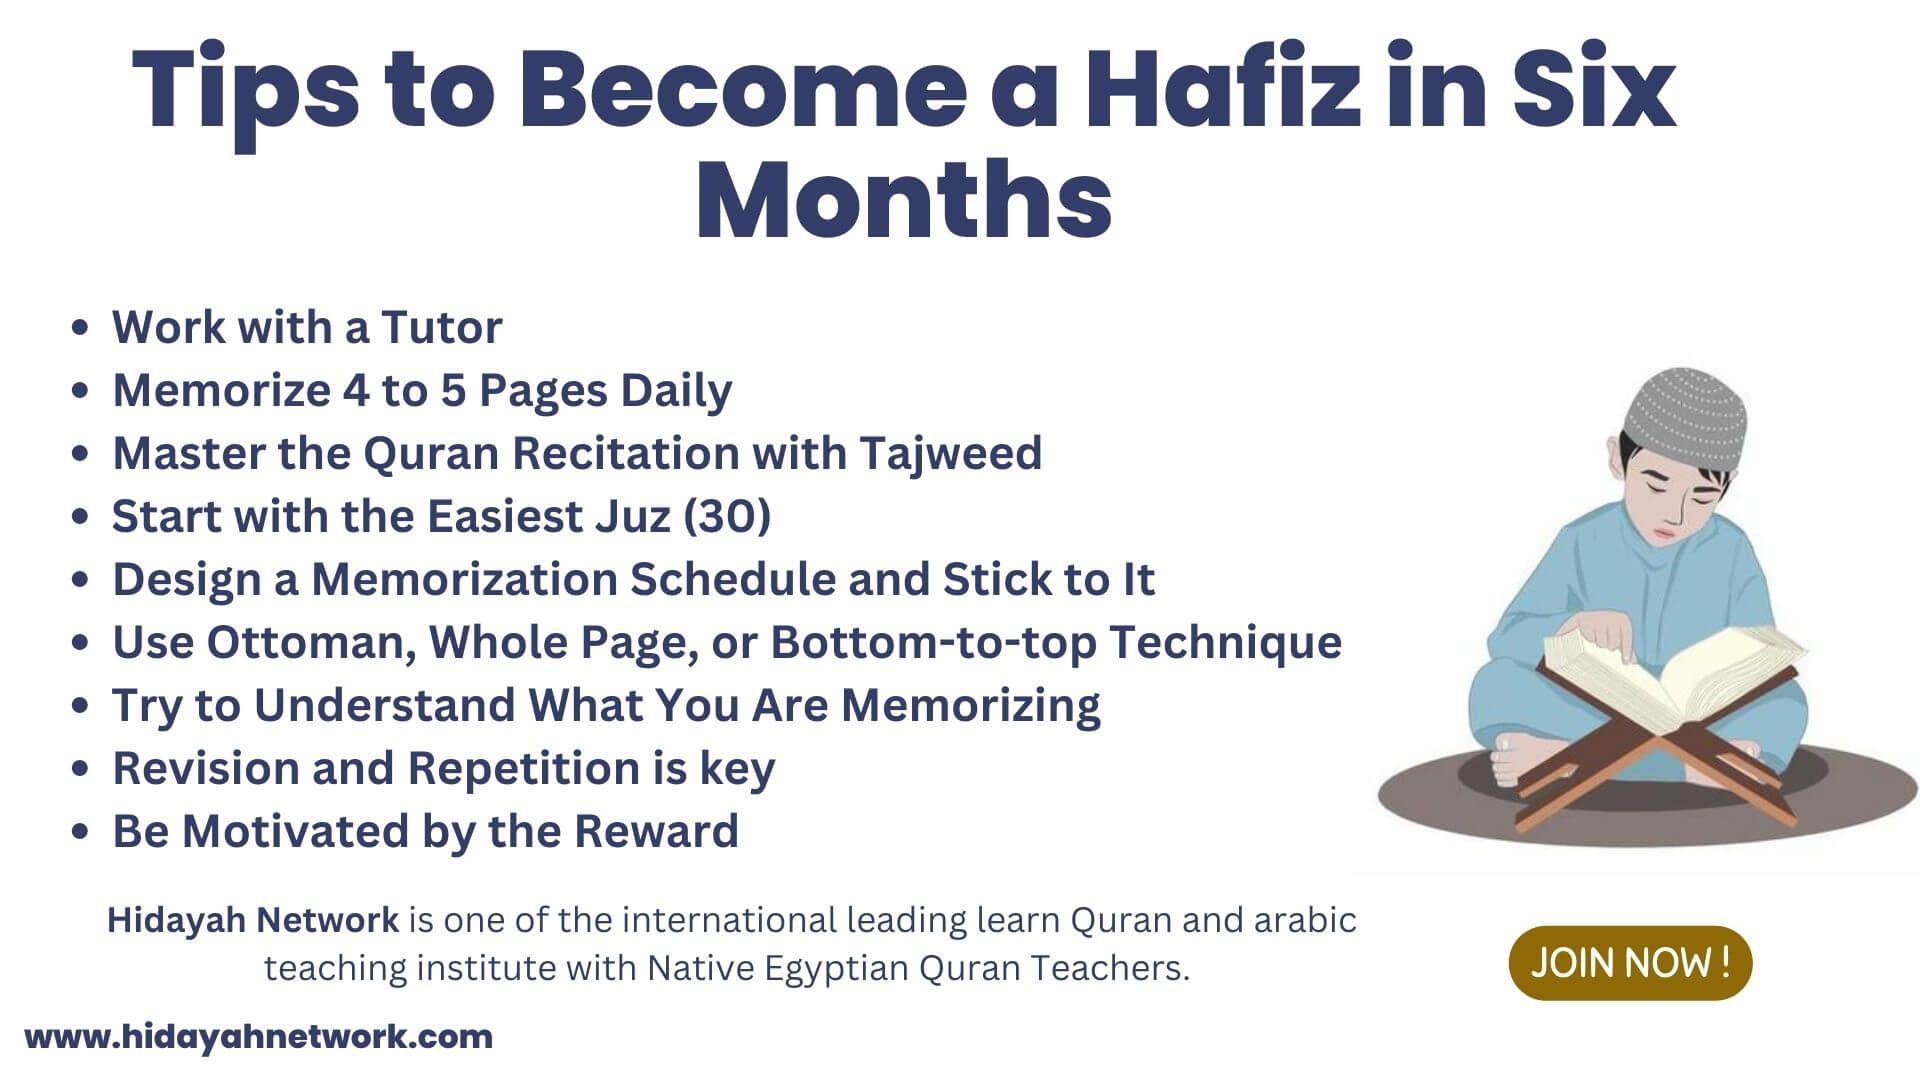 Tips to Become a Hafiz in Six Months